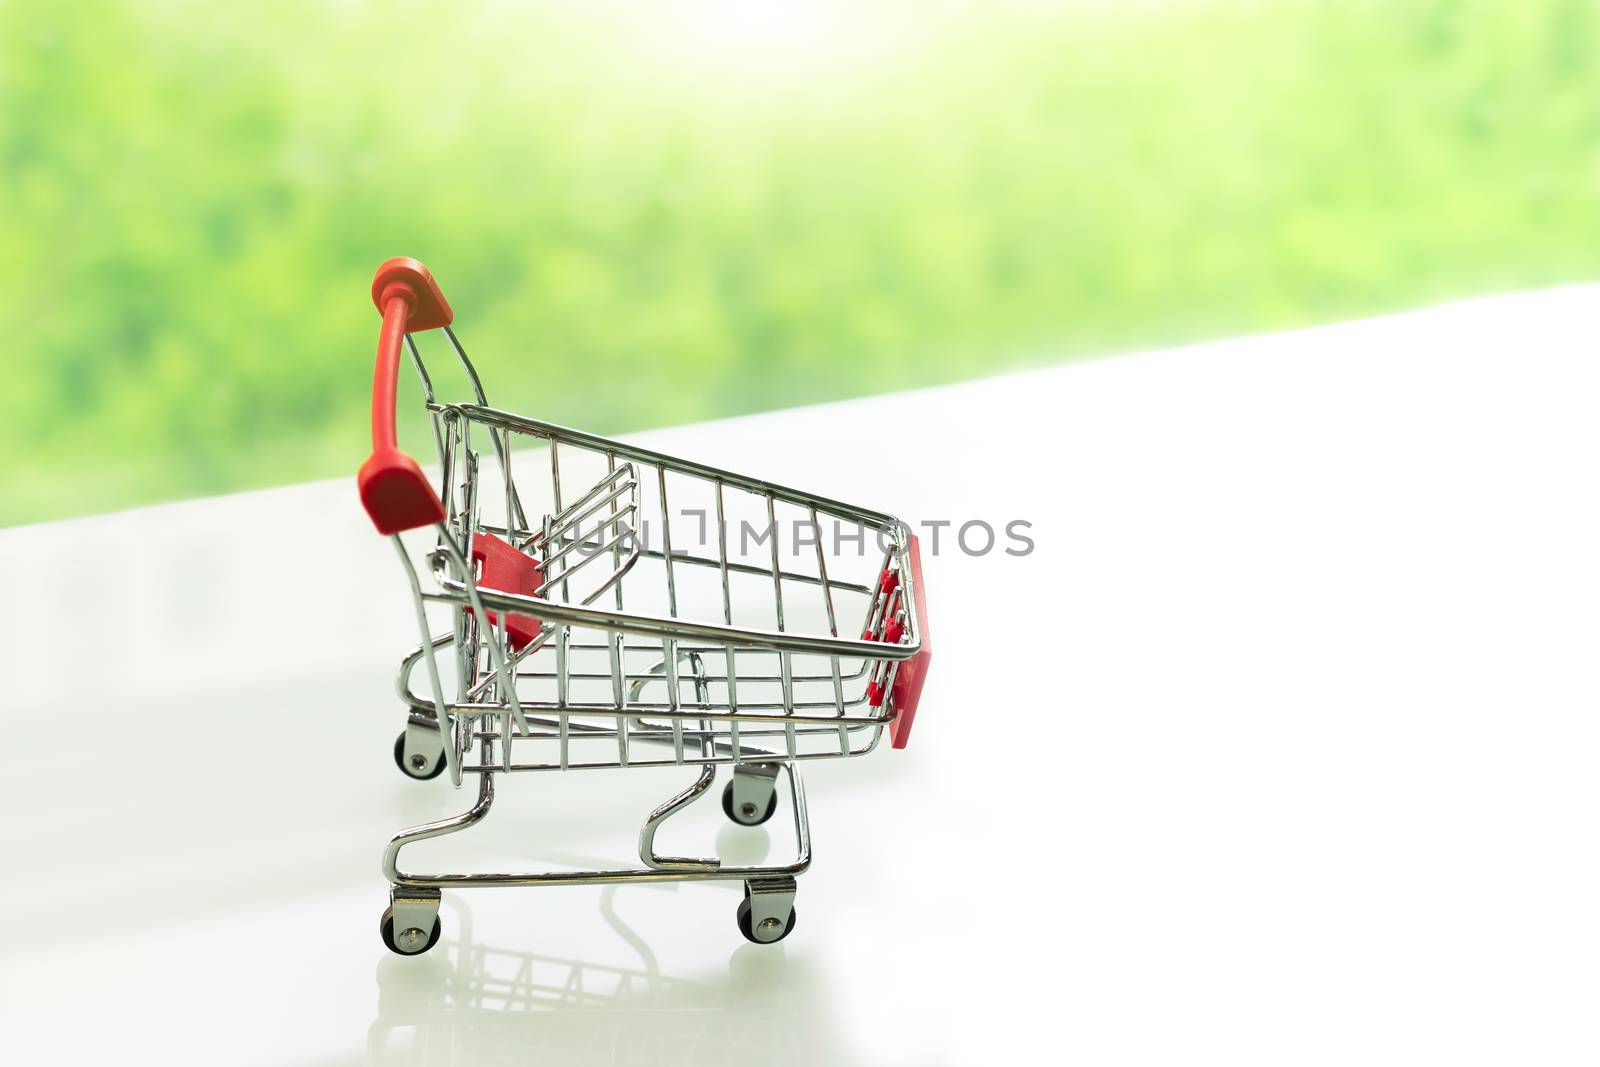 Empty shopping cart trolley on white table with green backgrounds